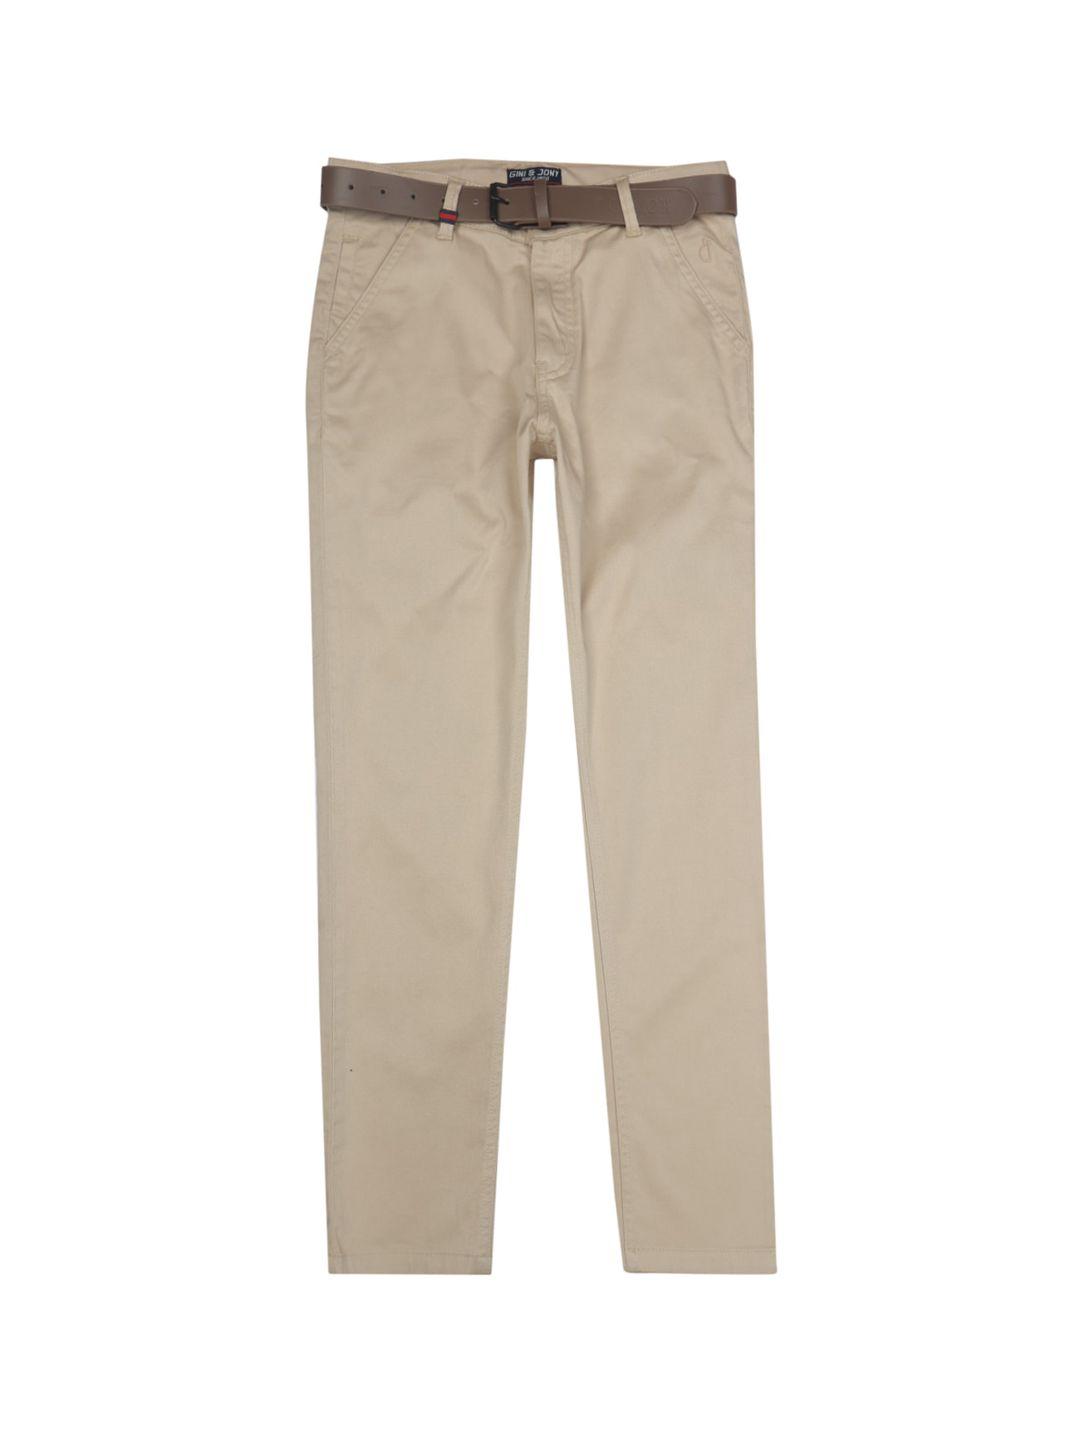 gini and jony boys cotton regular fit chinos trousers